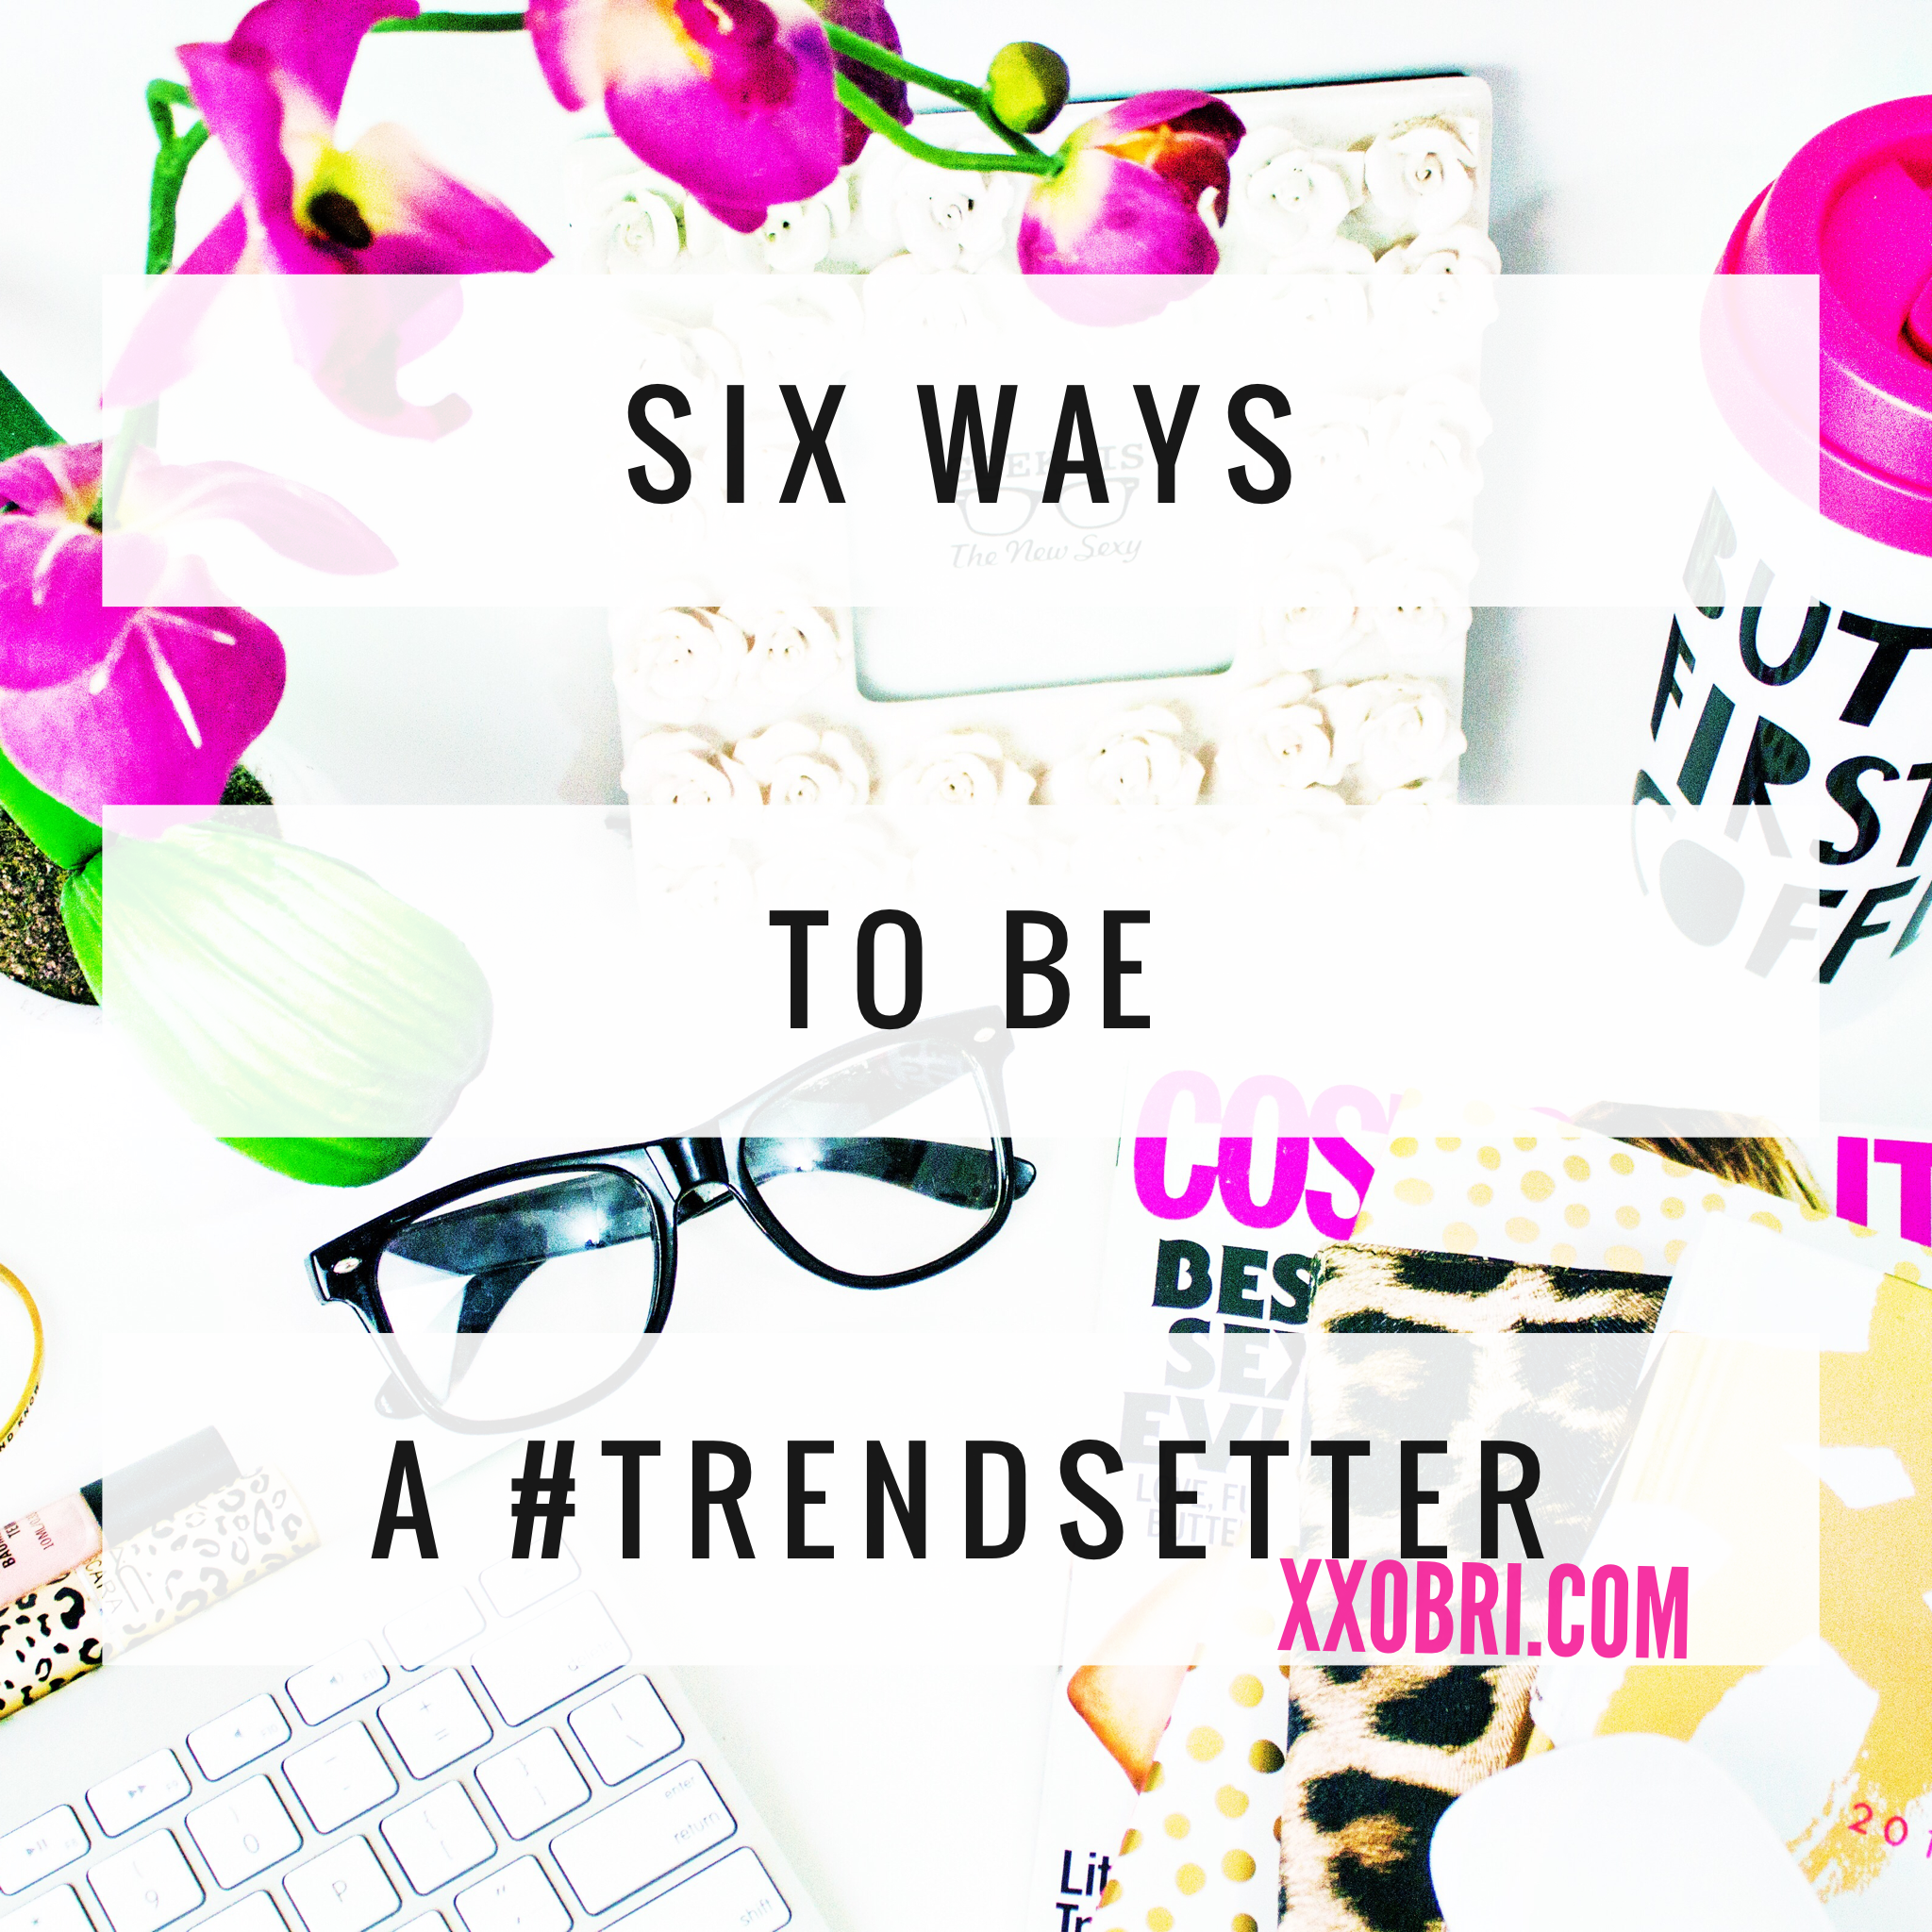 SIX-WAYS-TO-BE-A-TRENDSETTER-STAND-OUT-ONLINE.PNG